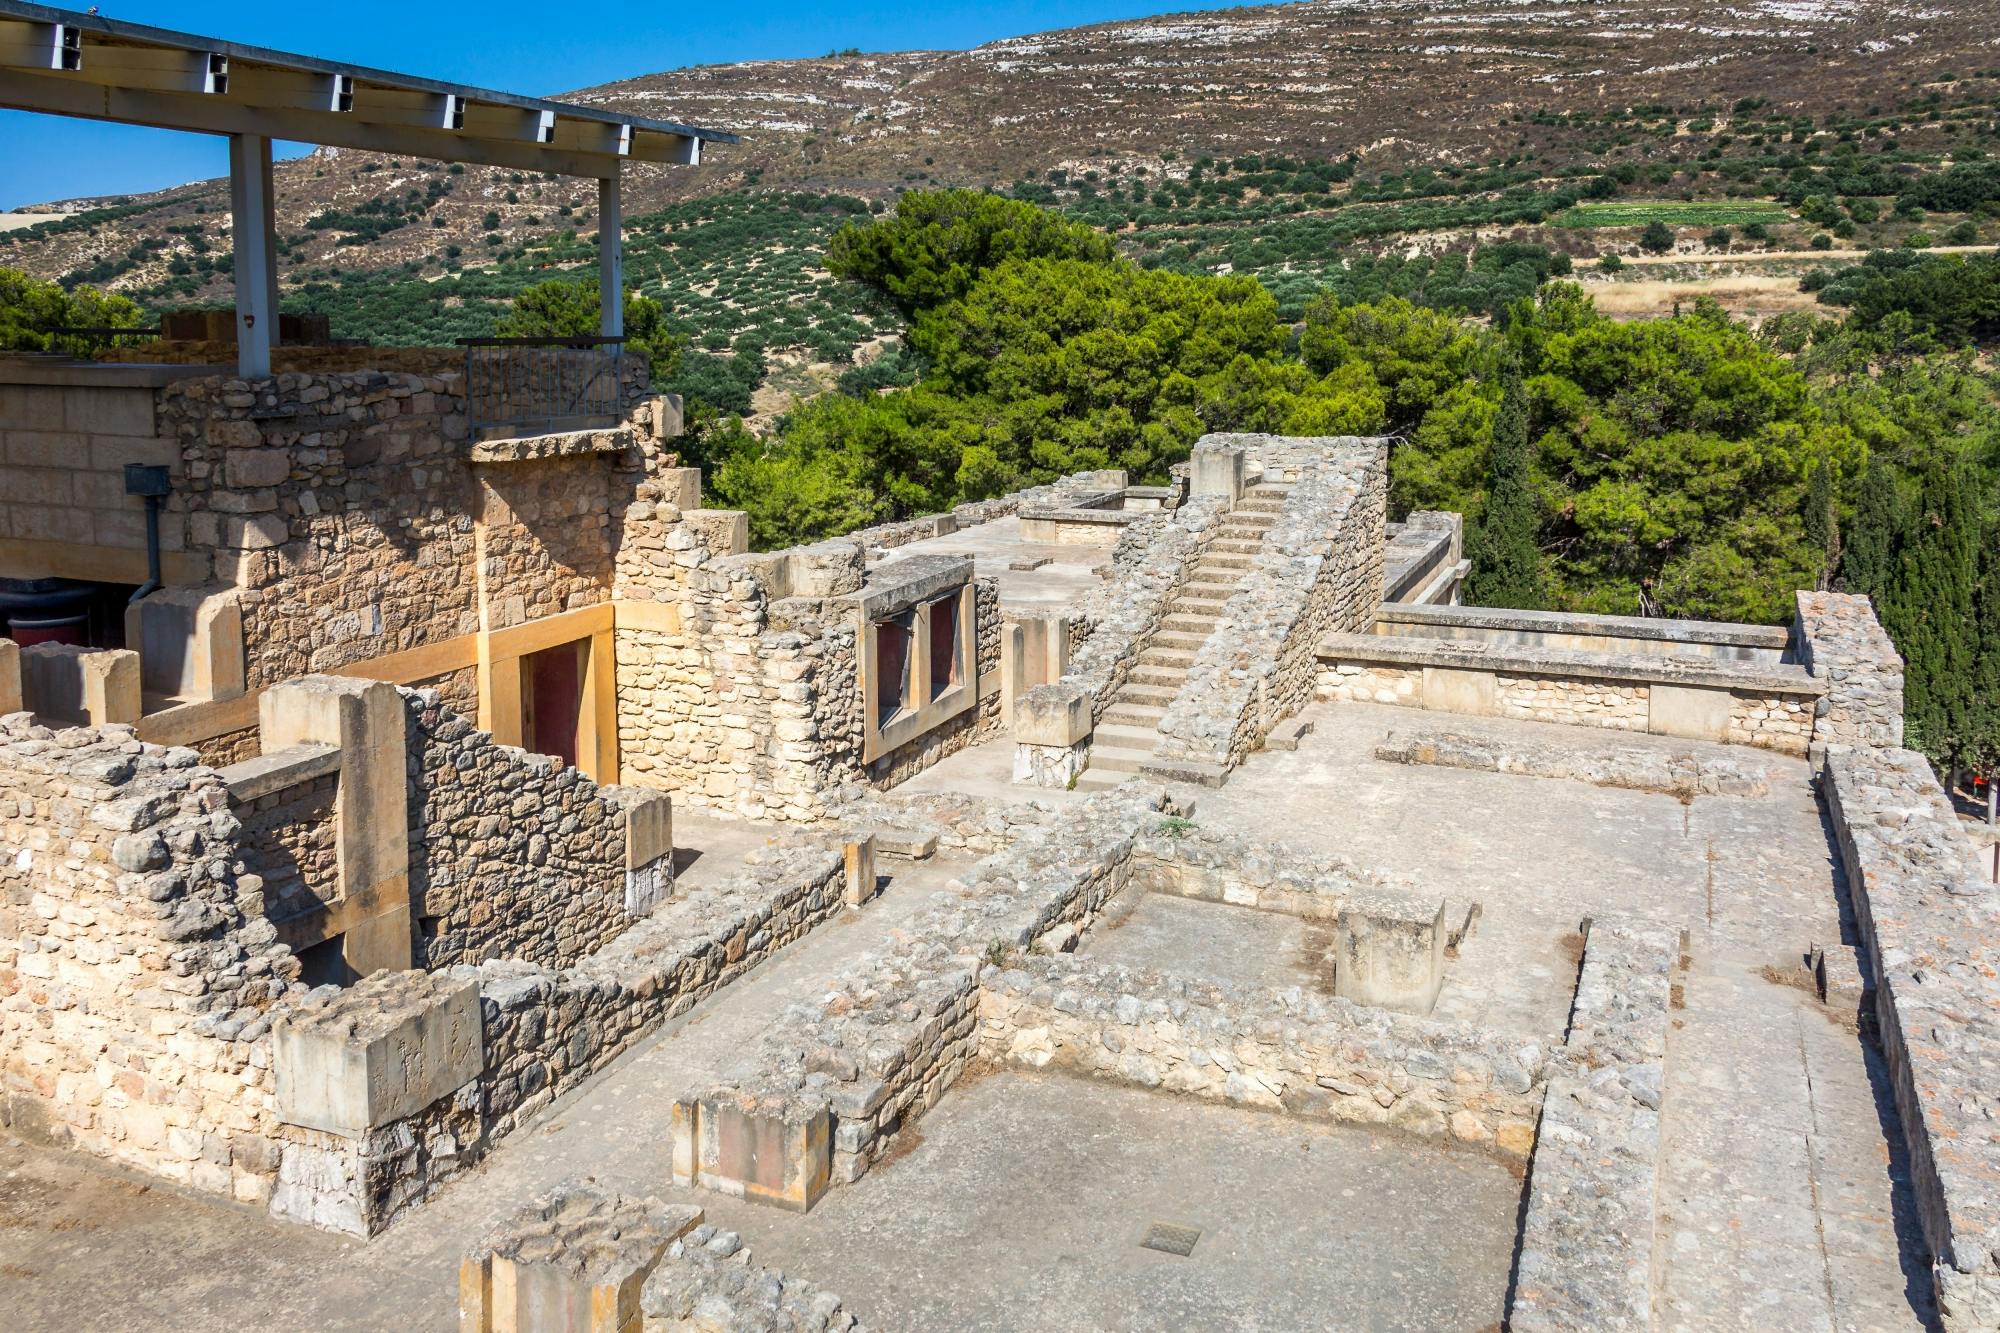 Excursion to Knossos Palace from South Crete